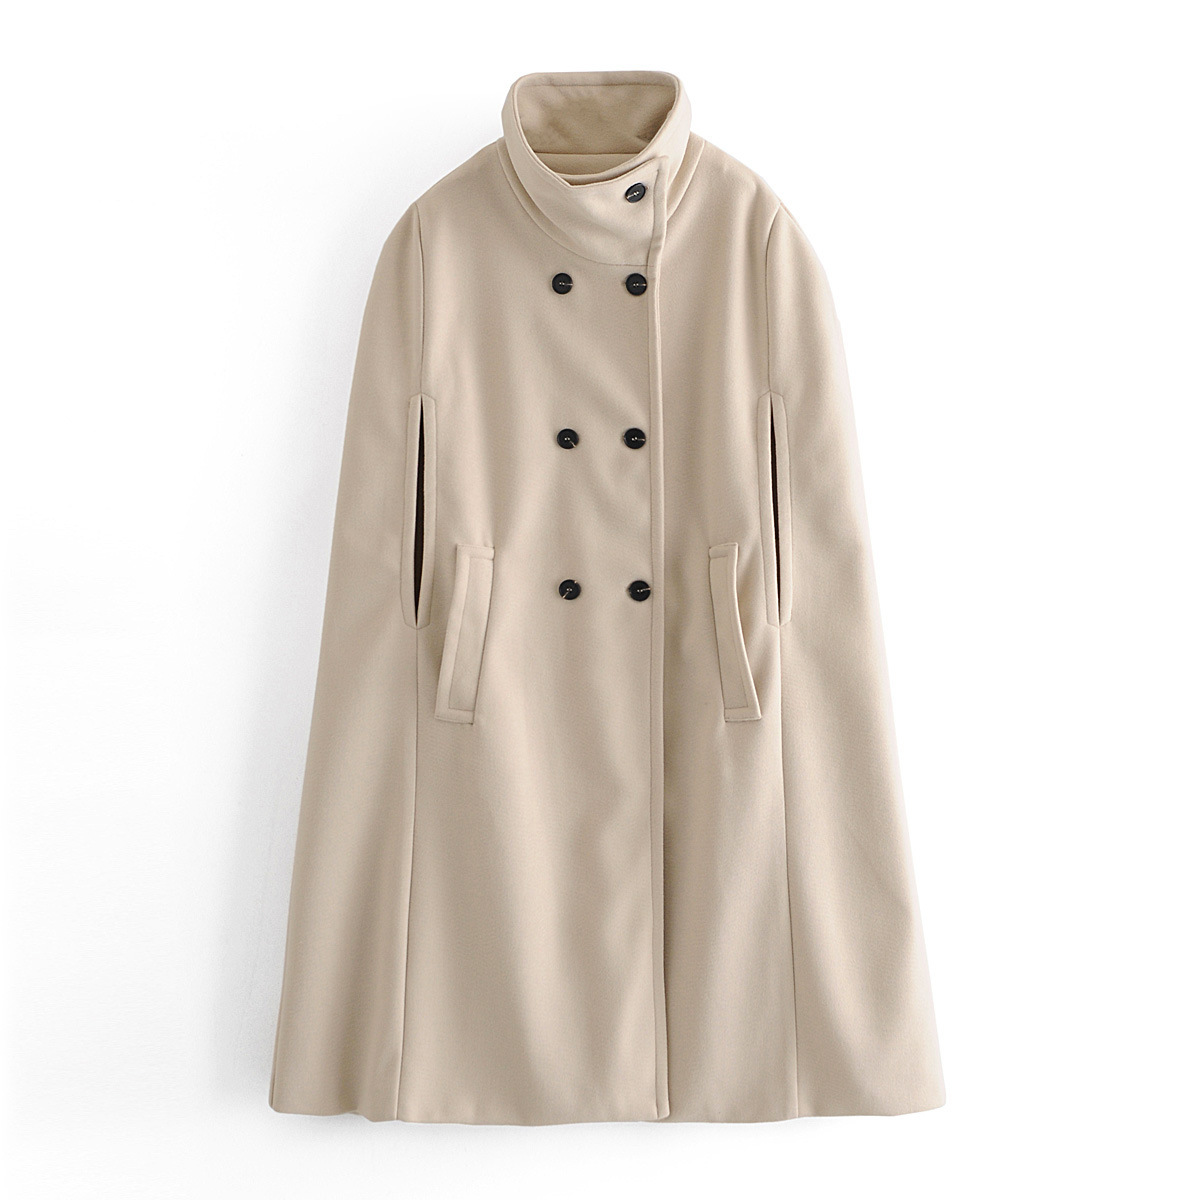 The Fall/winter Collection Features A Double-breasted Woolen Cape Coat